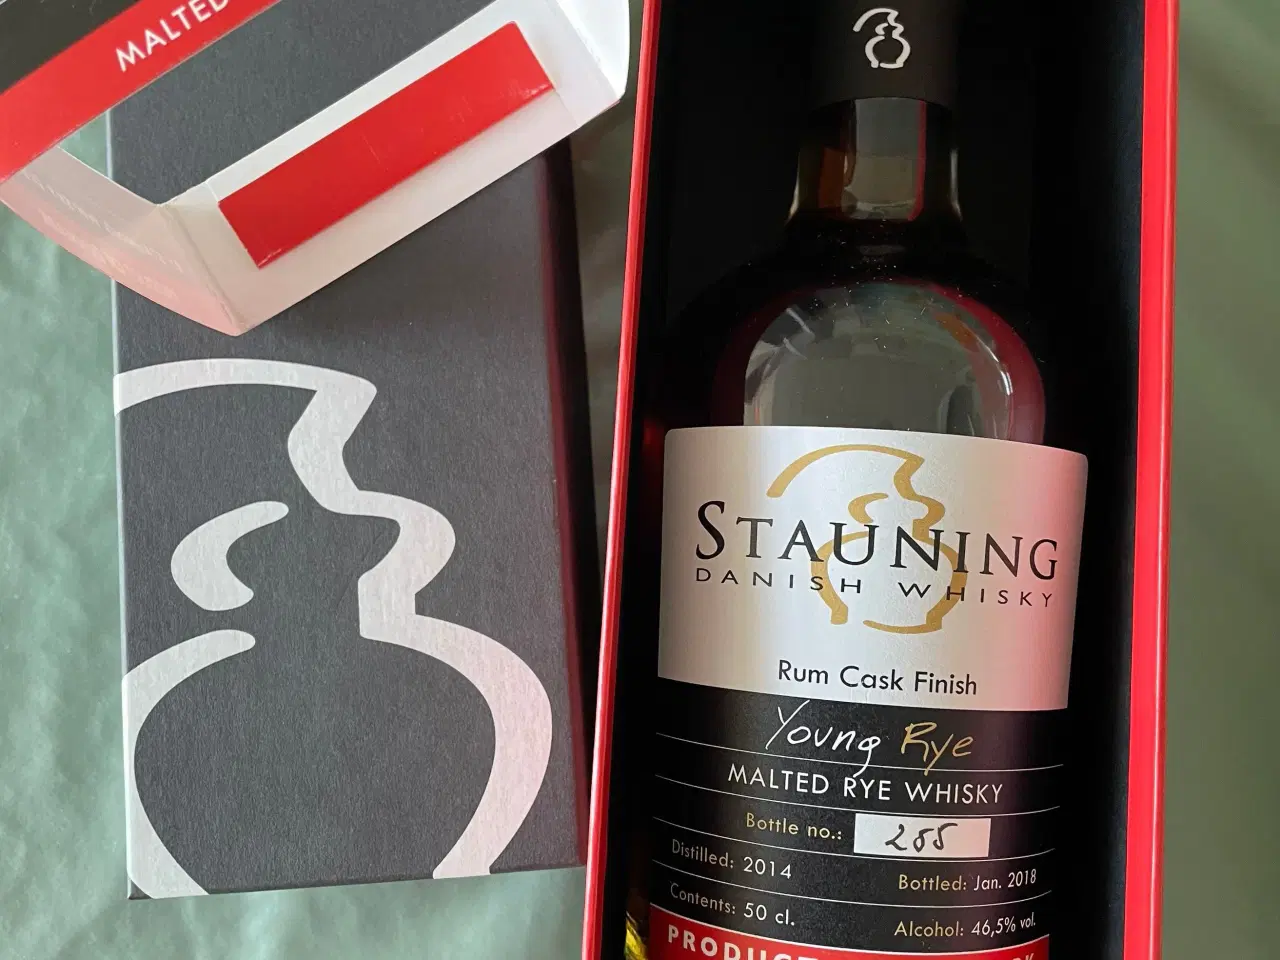 Billede 1 - Stauning whisky Rum Cask Finish Young Rey